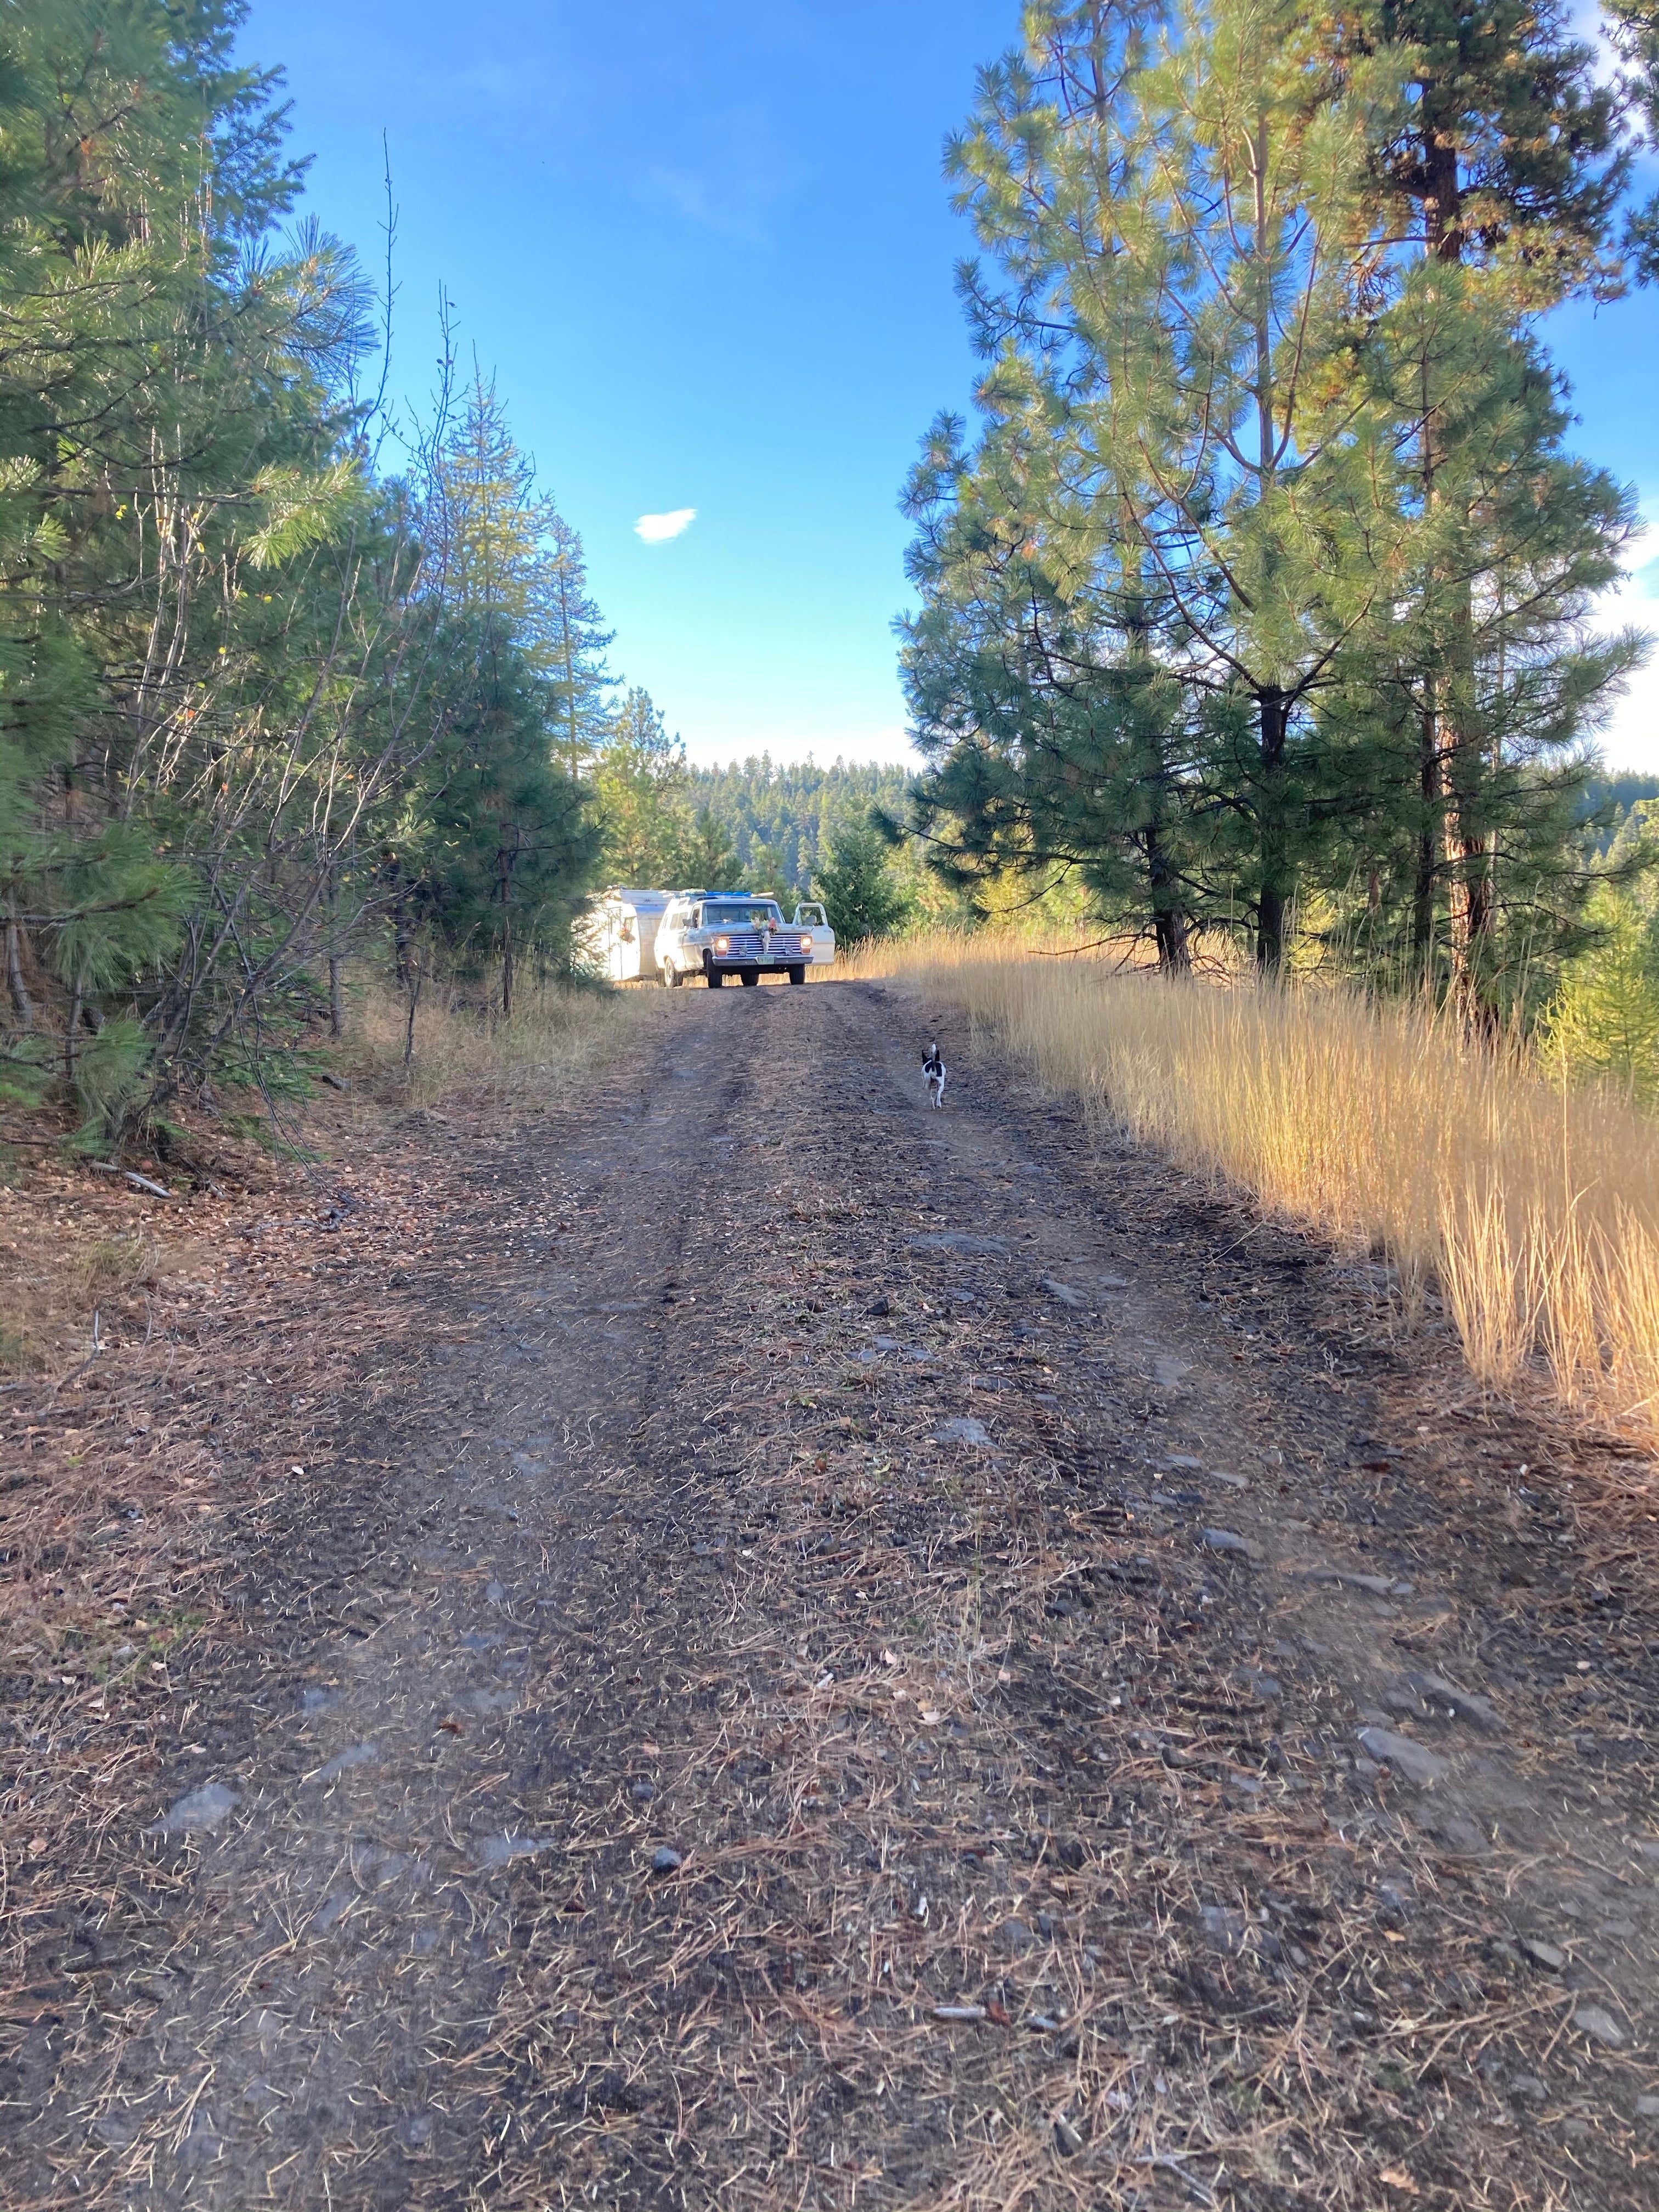 Camper submitted image from Ochoco National Forest - 3